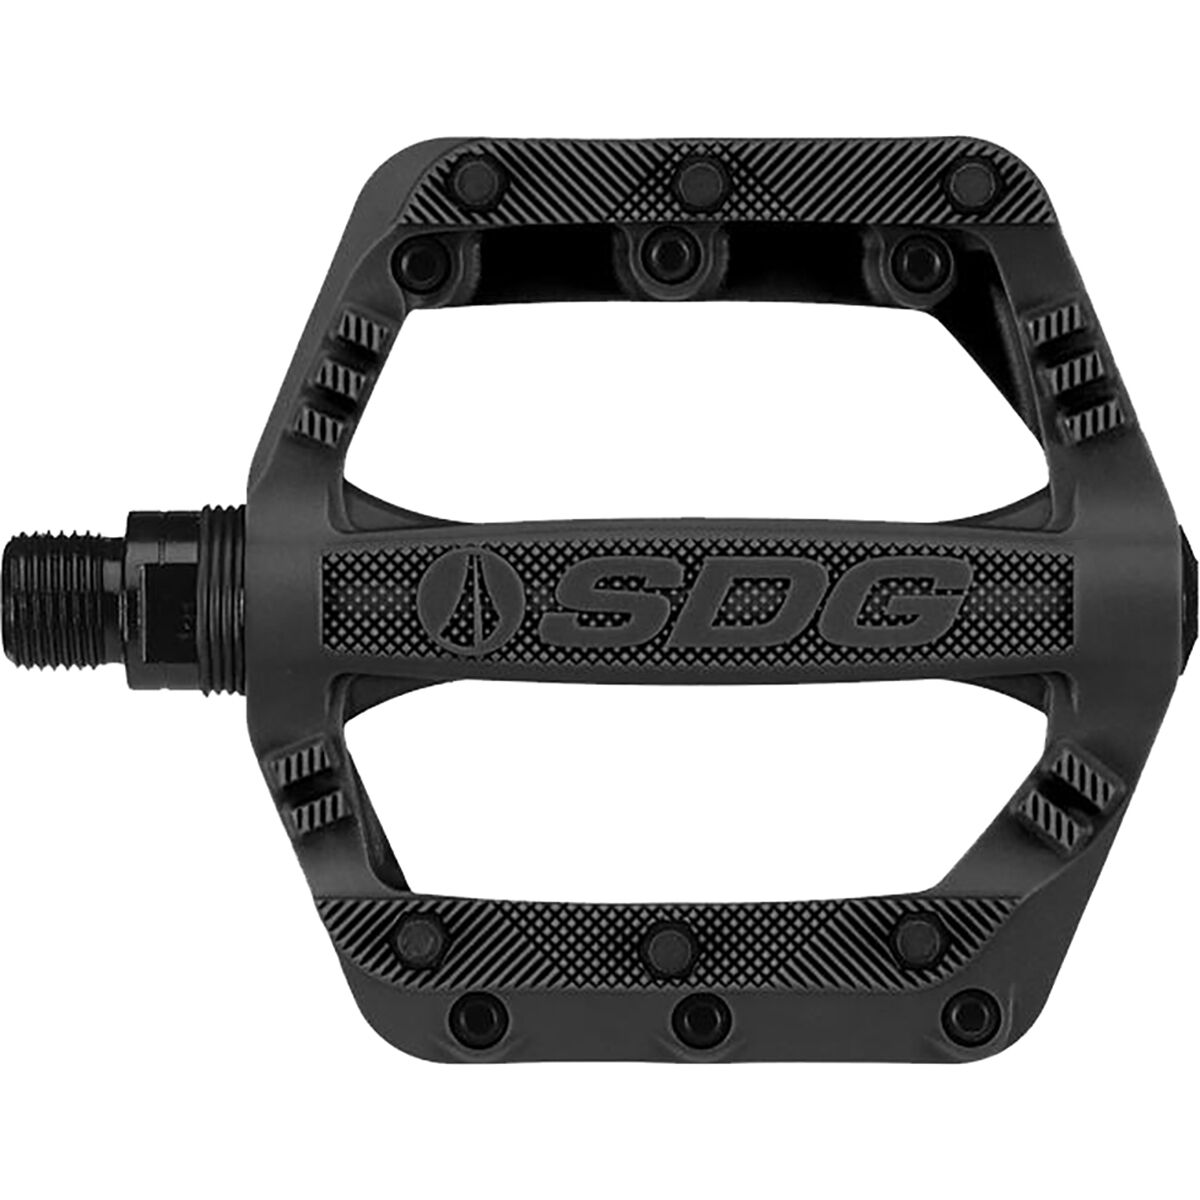 SDG Components Slater Pedals Black, One Size